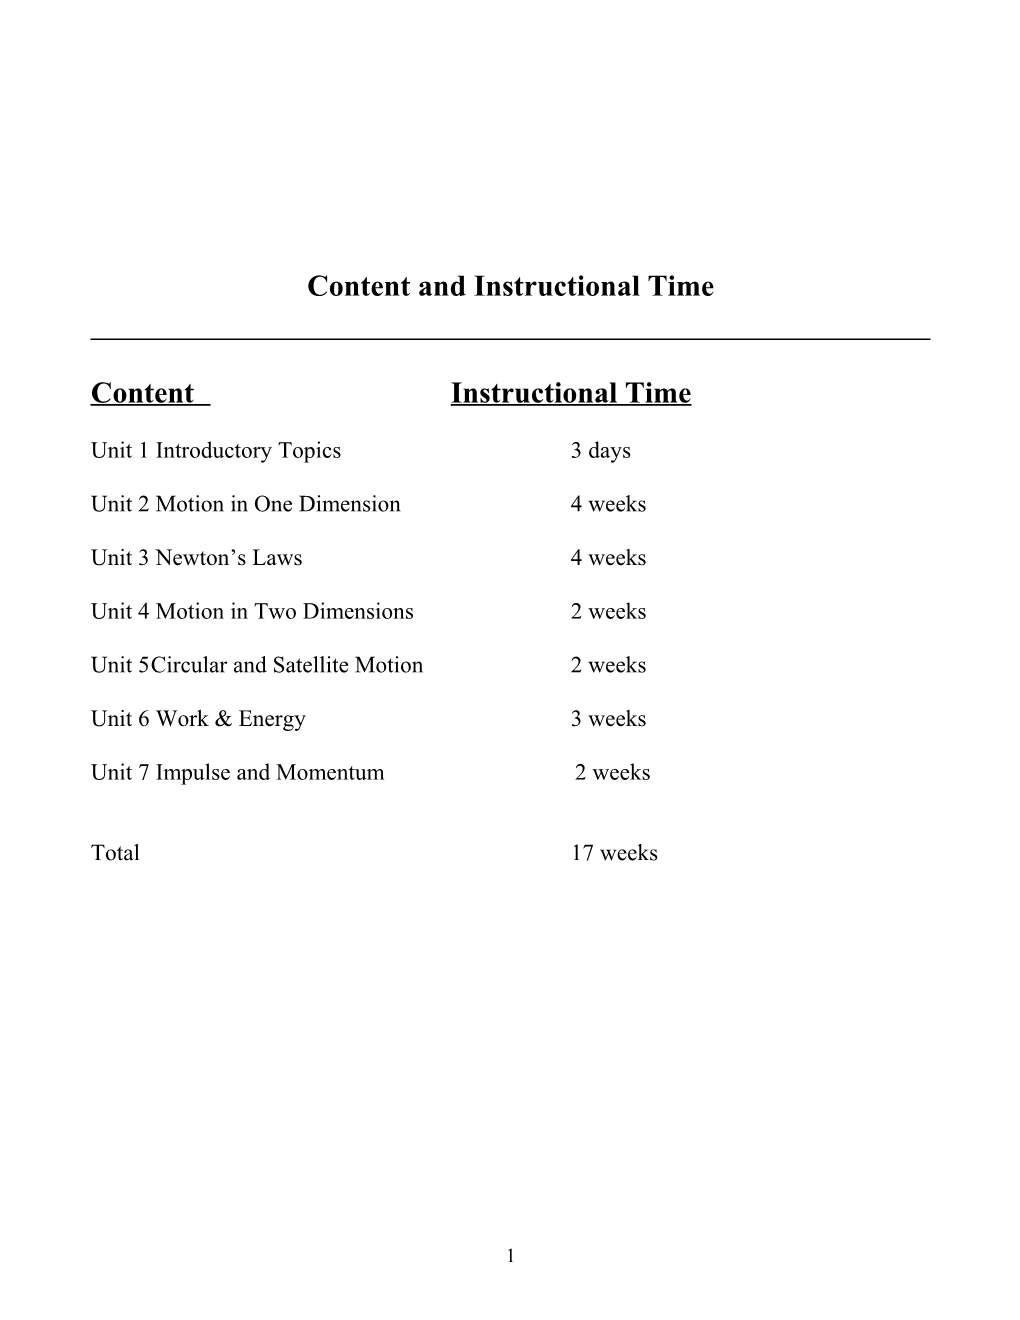 Content and Instructional Time